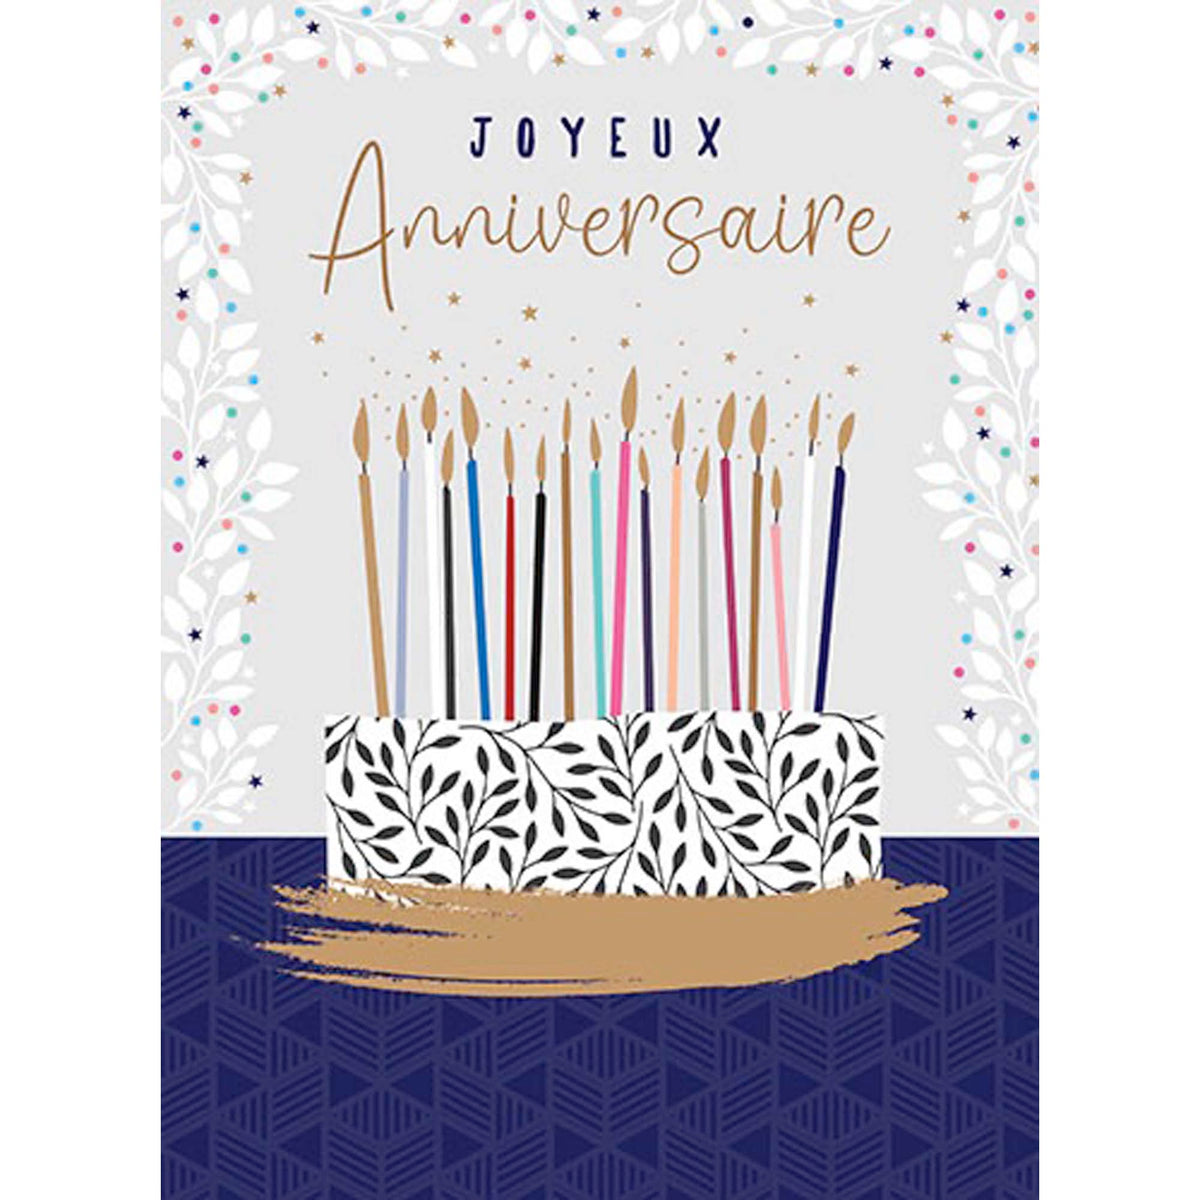 DISTRIBUTION INCOGNITO Greeting Cards Giant Birthday Card, "Joyeux Anniversaire" Cake, 1 Count